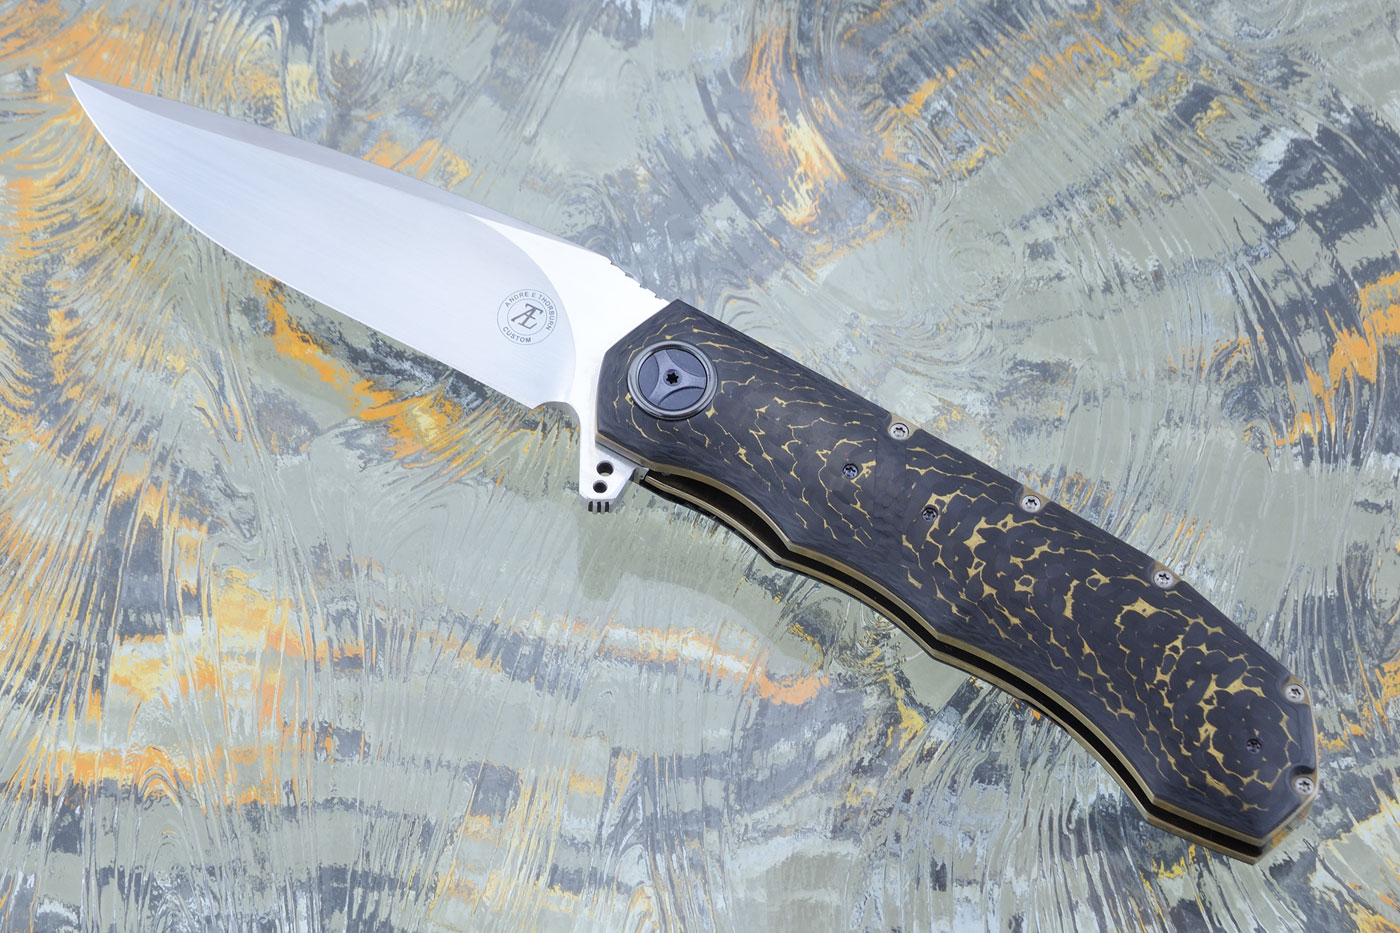 L51 Compact Flipper with Carbon Fiber and Gold Snakeskin FatCarbon (Ceramic IKBS) - CTS-XHP